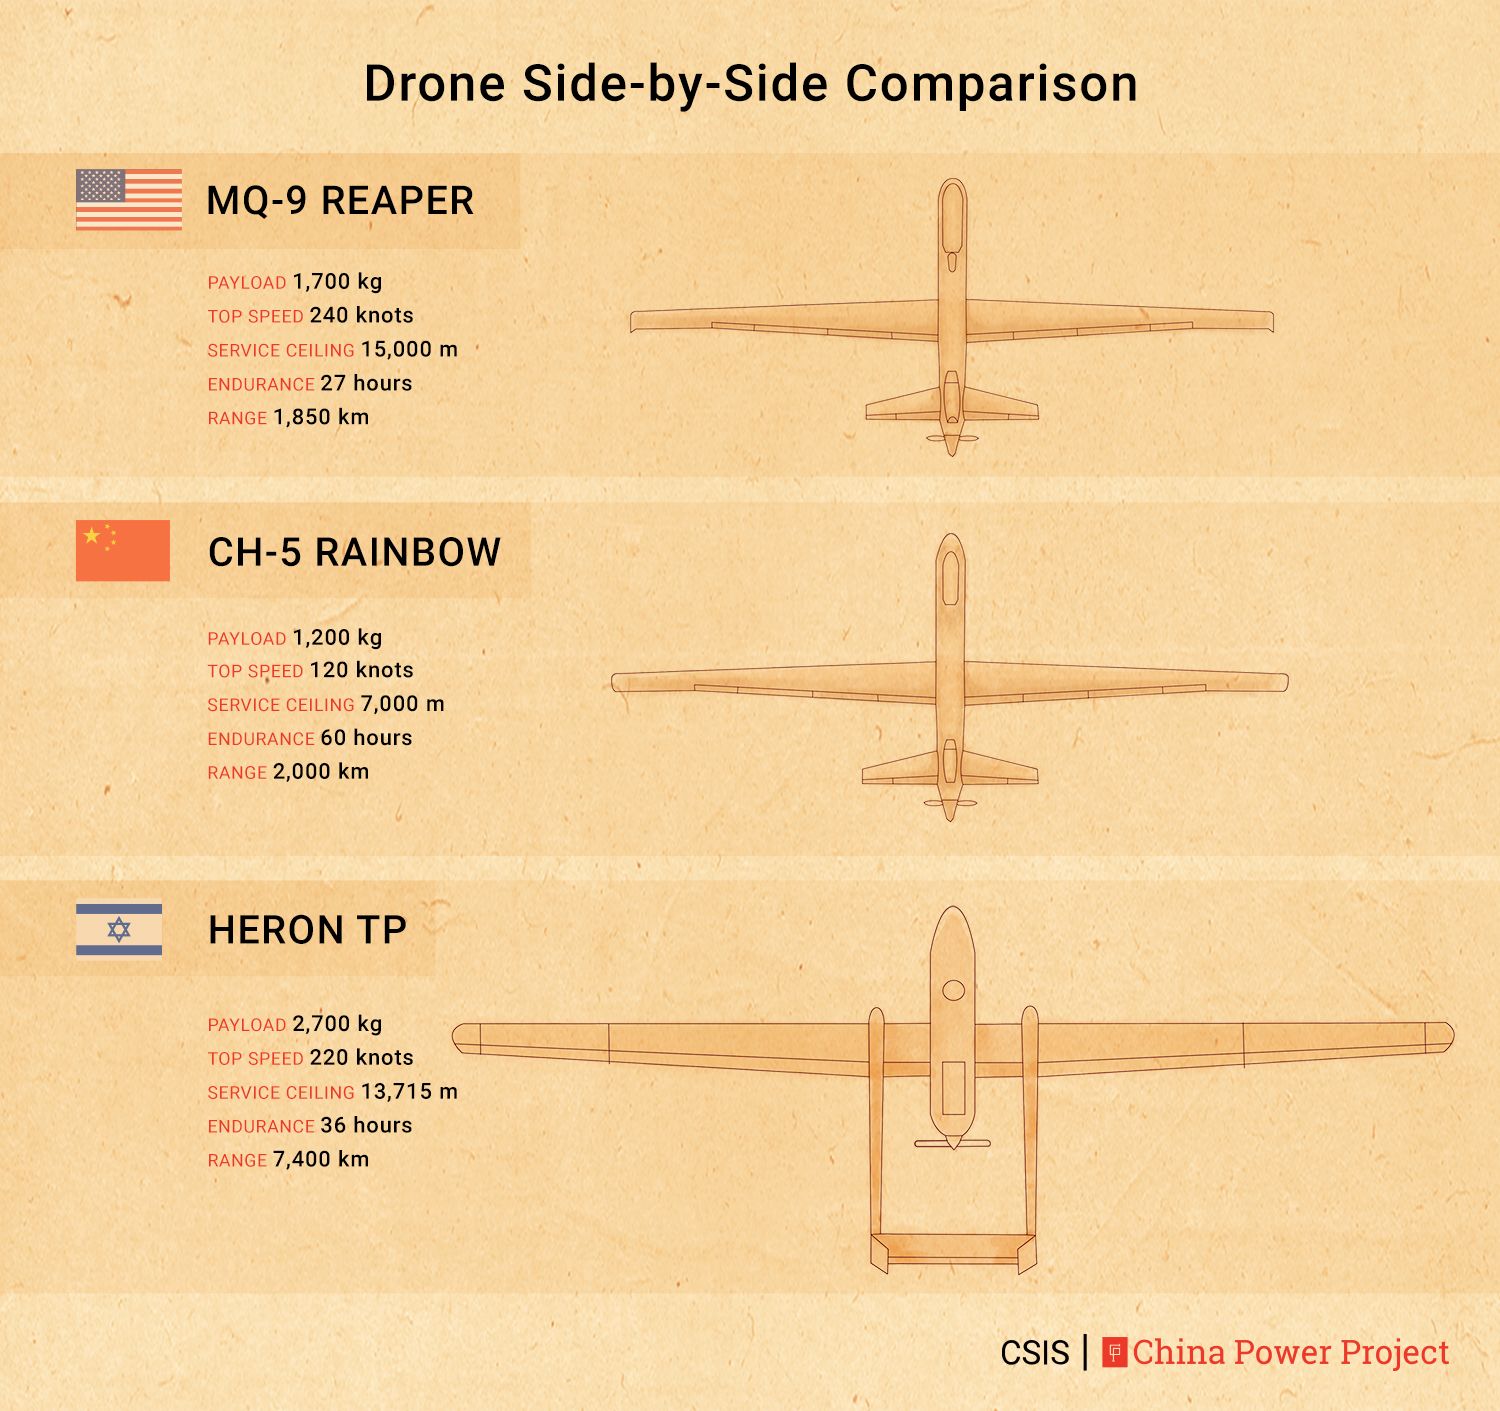 Illustration of 3 drones: the US MQ-9 Reaper, the Chinese CH-5 Rainbow, and the Israeli Heron TP. Information includes payload in kilograms, top speed in knots, service ceiling in meters, endurance in hours, and range in kilometers